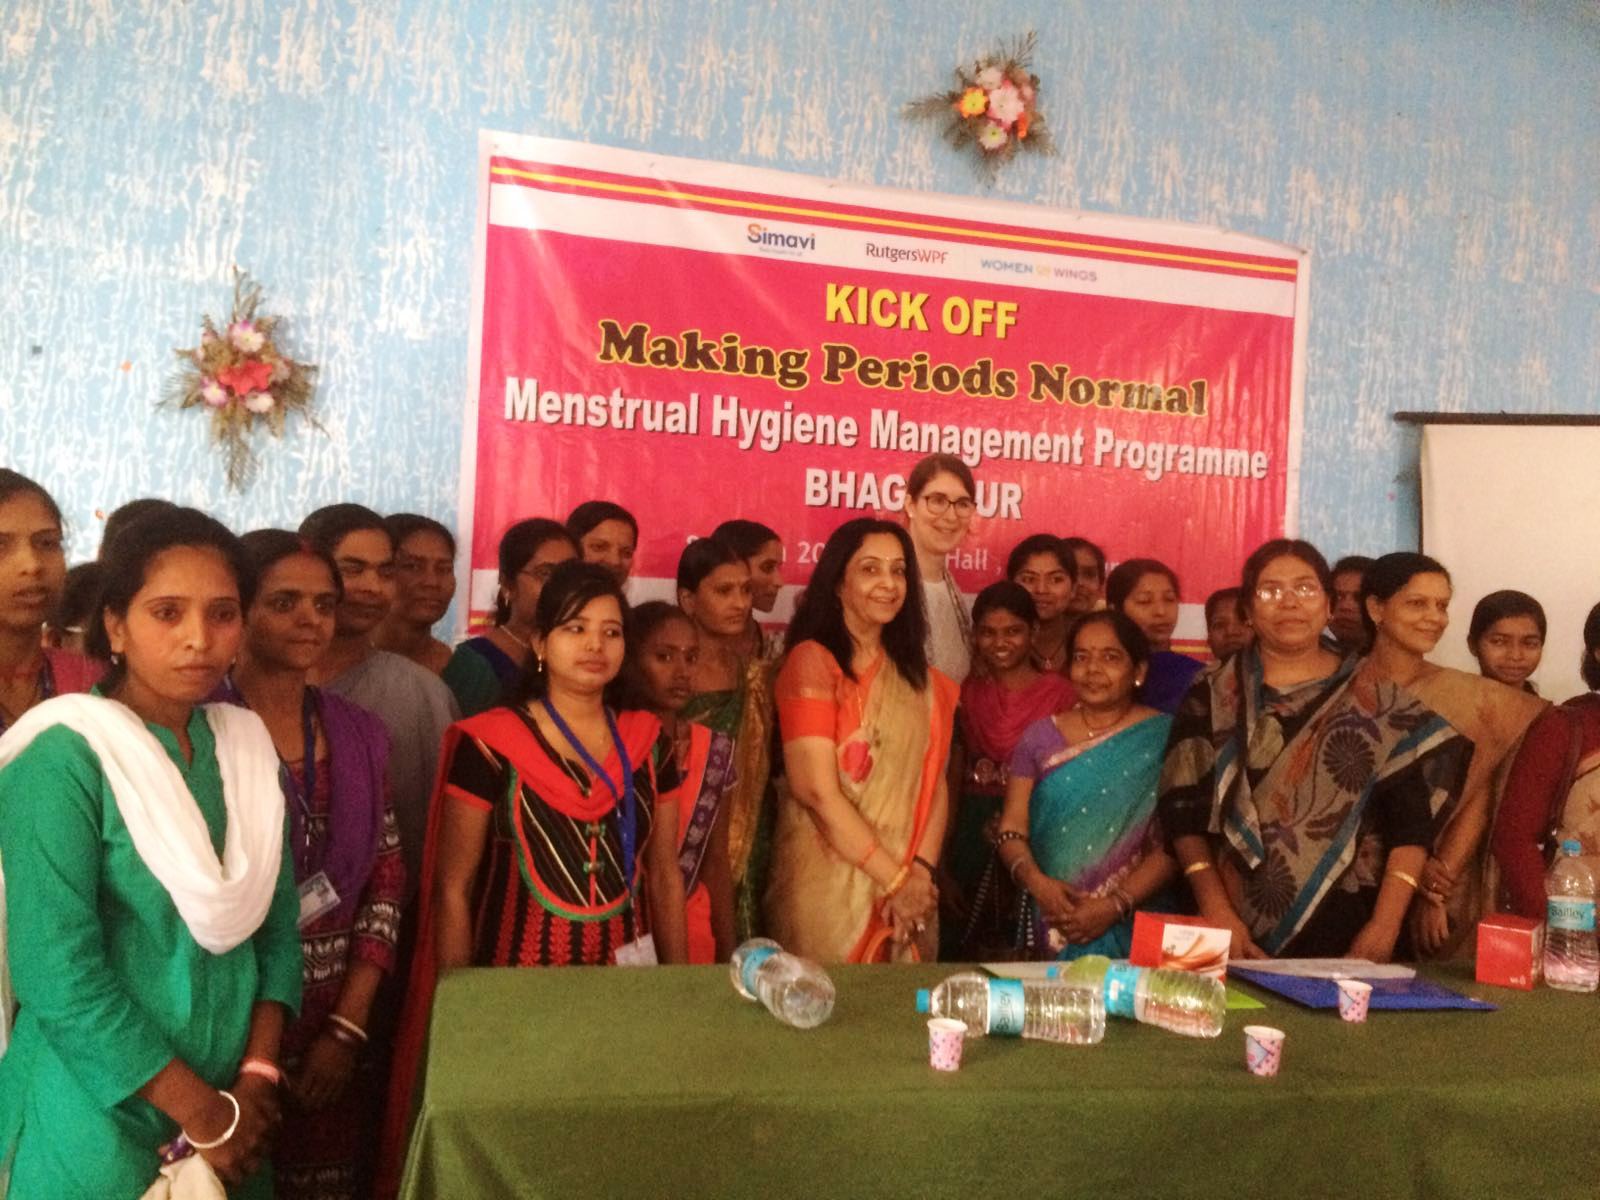 Kick-off second phase ‘Making periods normal’ in Bhagalpur, Bihar